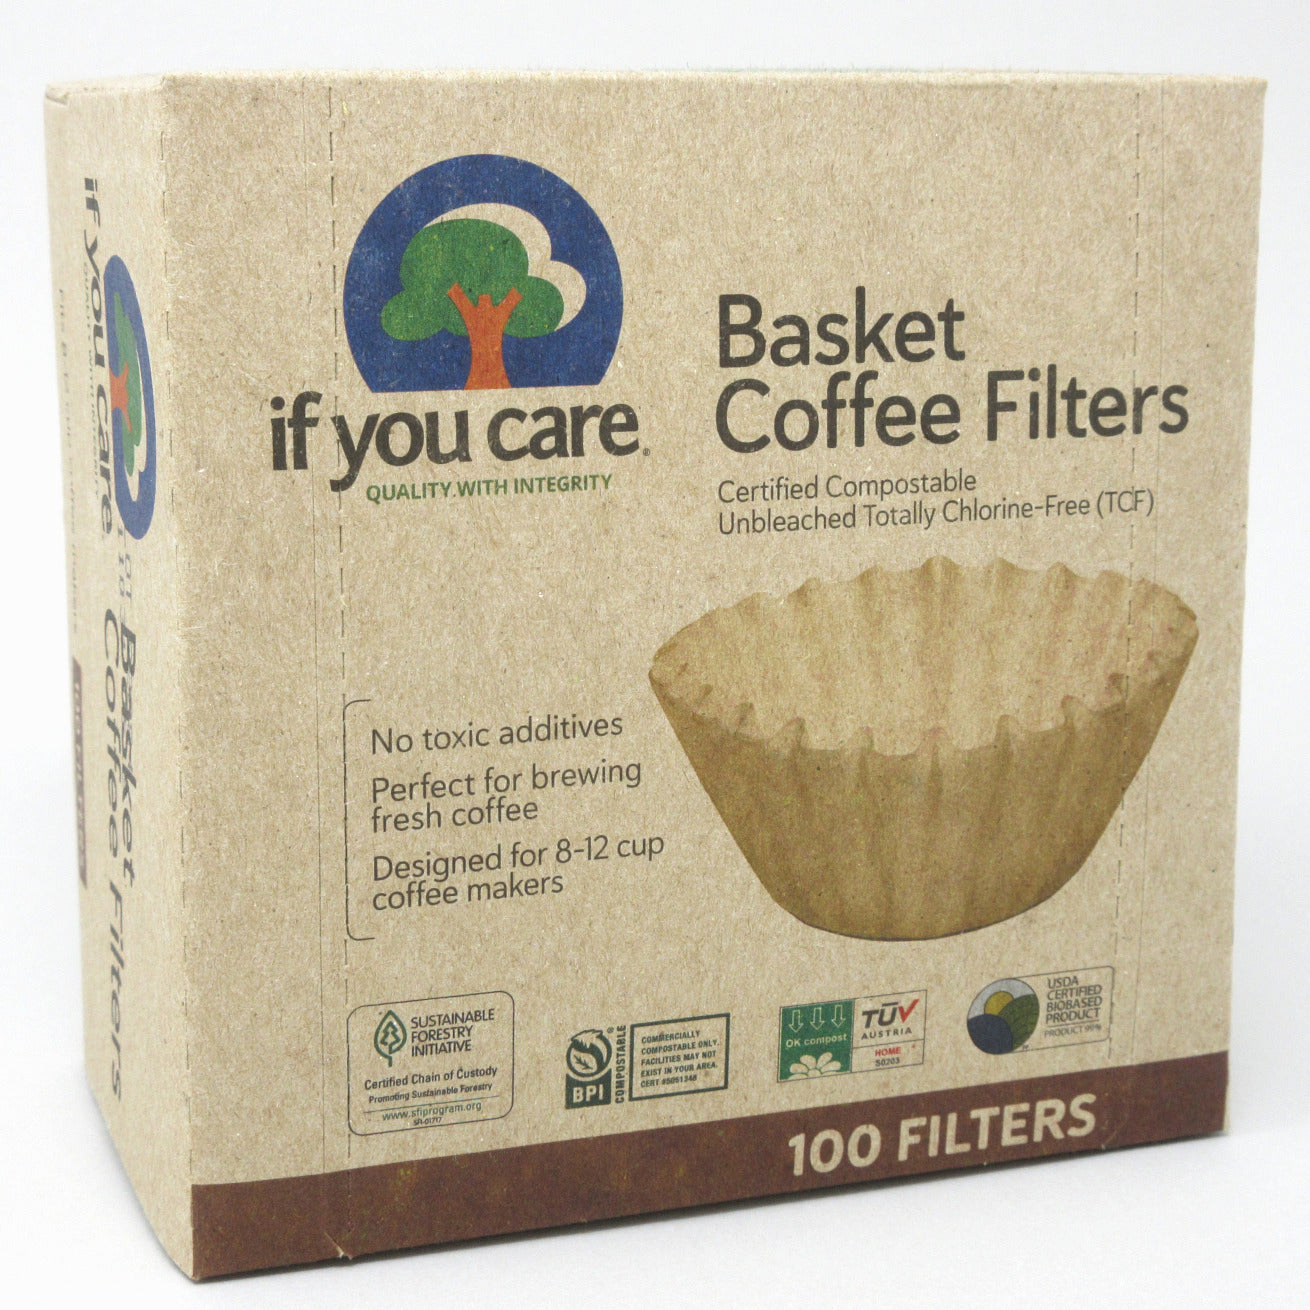 Flour Barrel product image - If You Care Coffee Filters